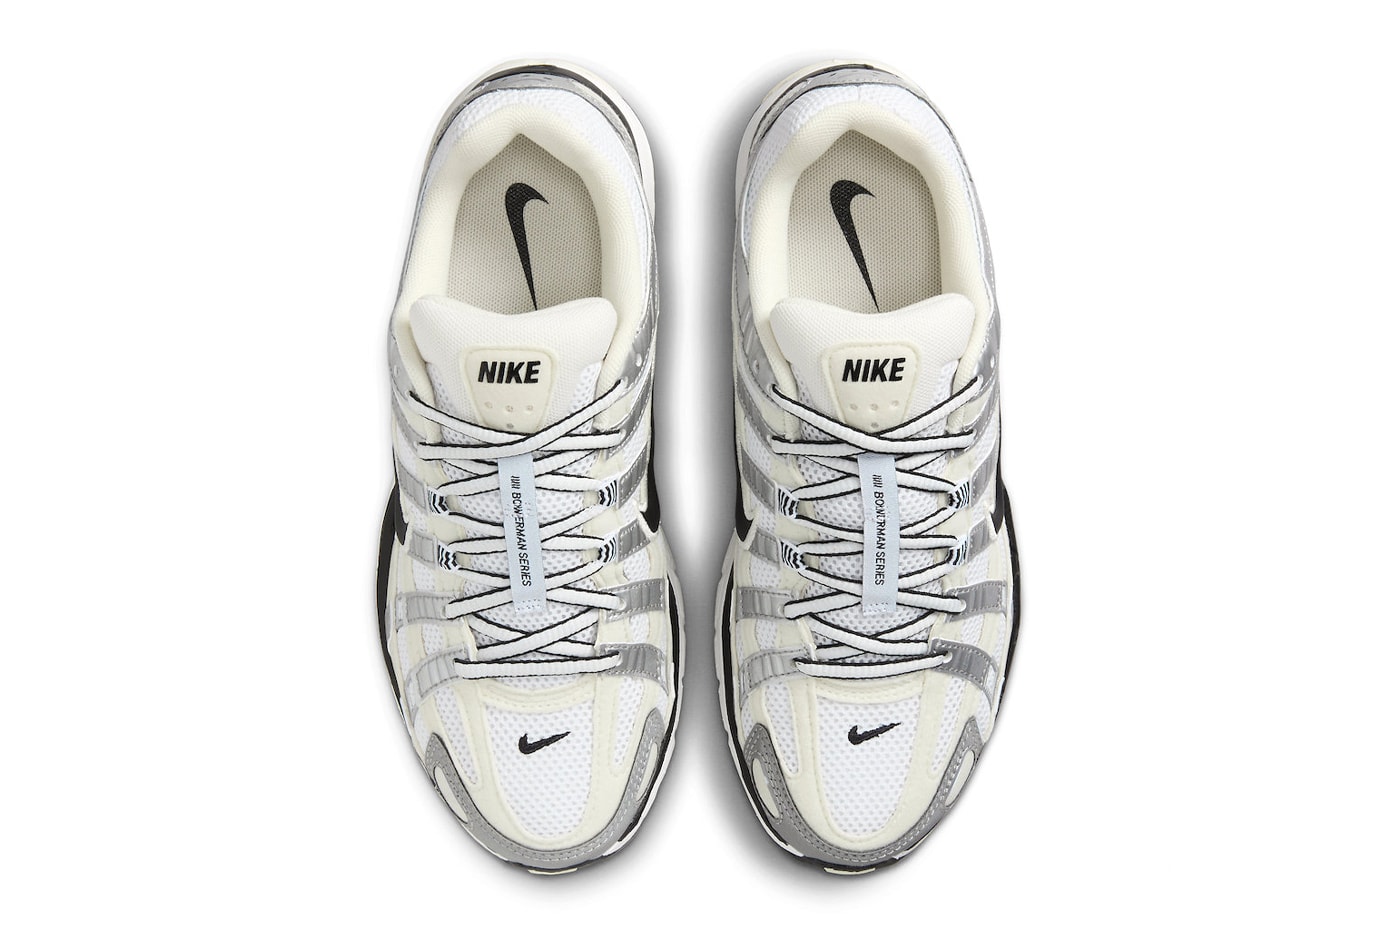 Nike P-6000 Arrives in Coconut Milk and Metallic Silver FV6603-100 technical sneakers swoosh shoes